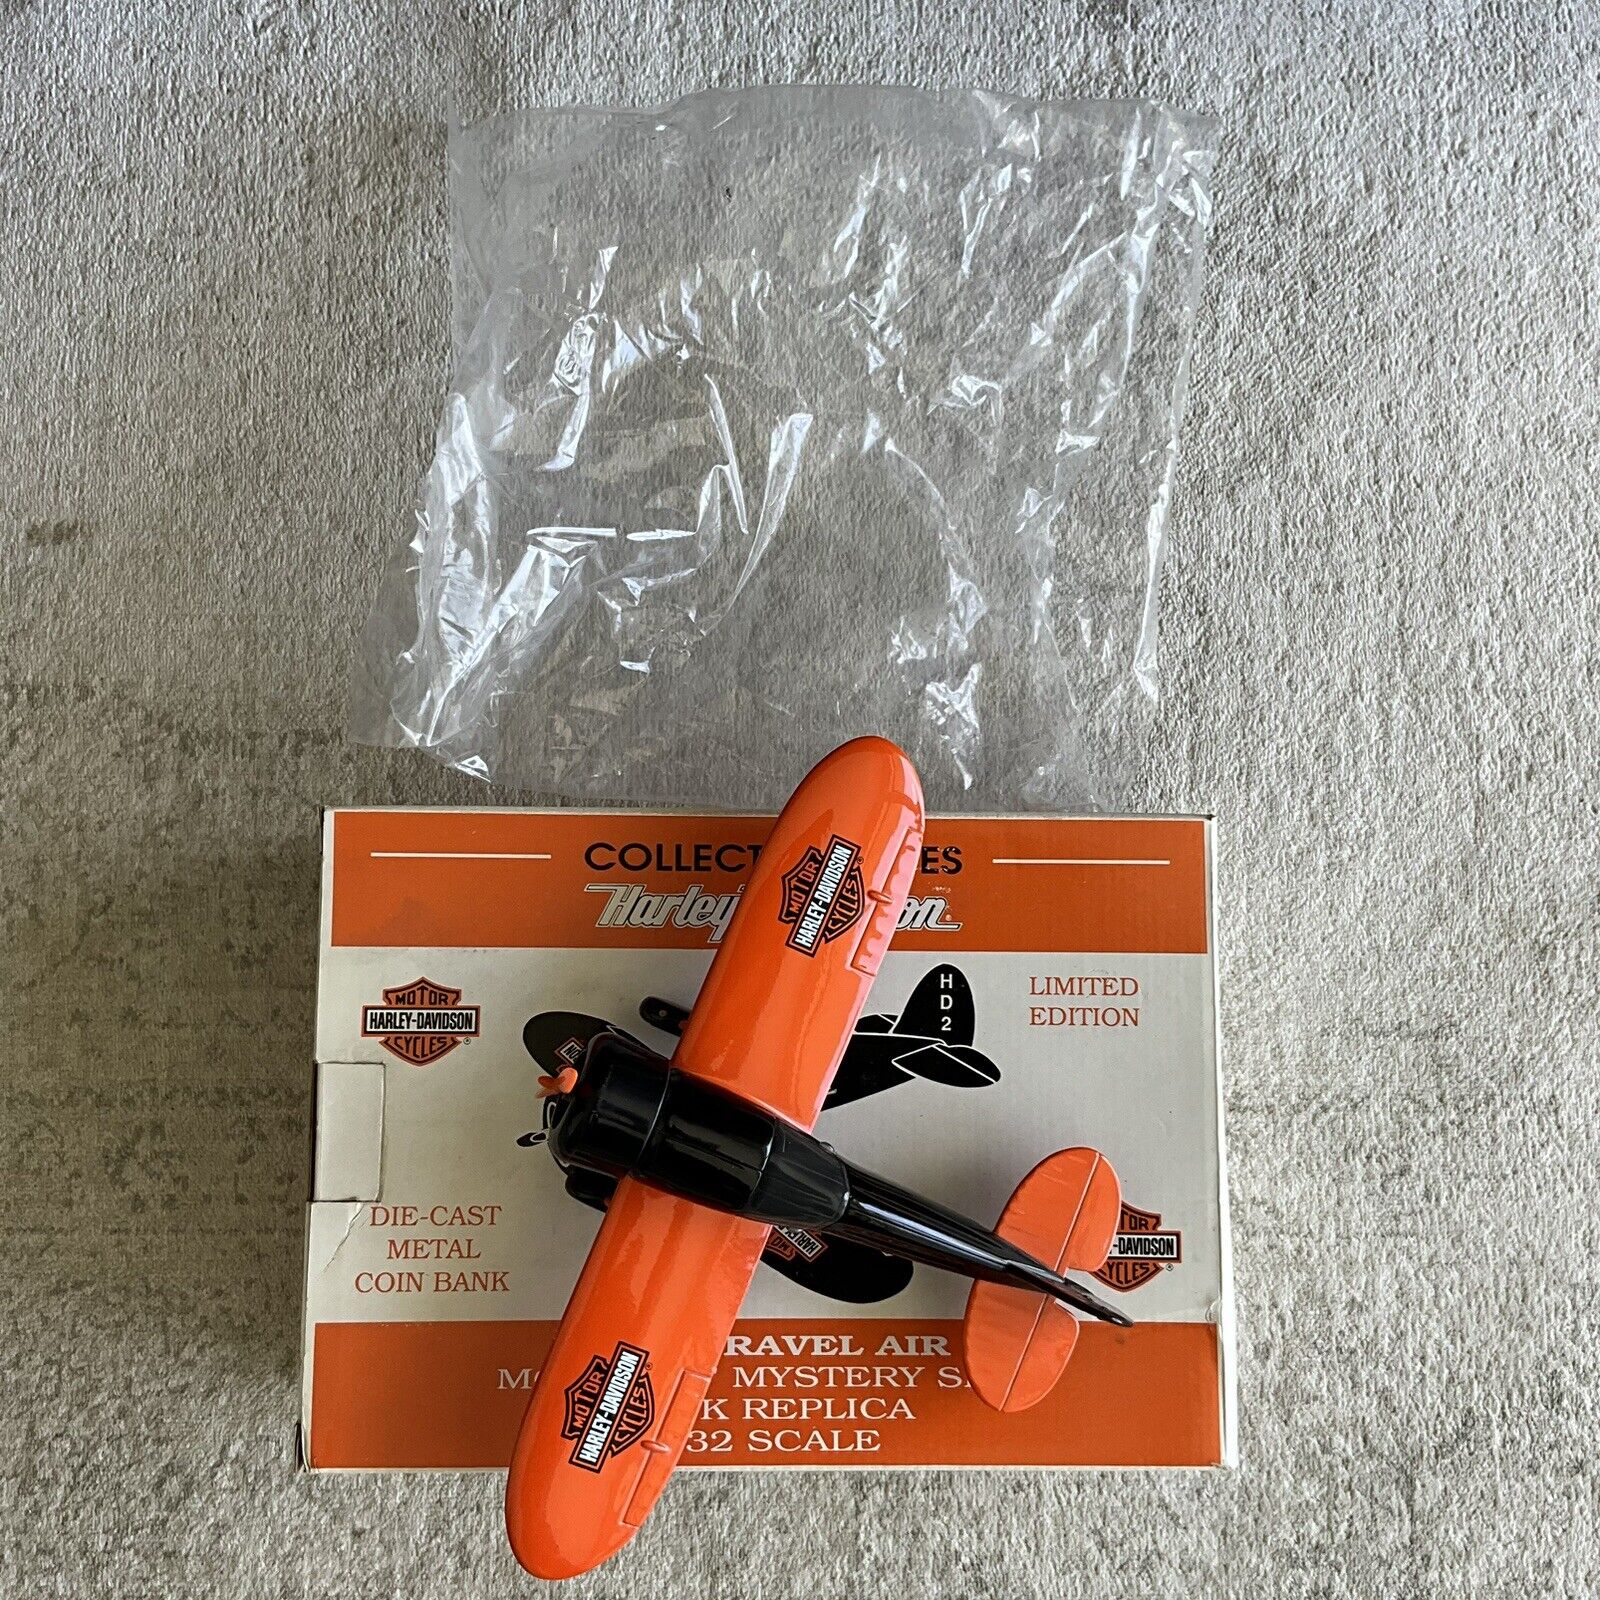 Harley-Davidson Collector Series Limited Edition Model R Mystery Plane Bank 1:32